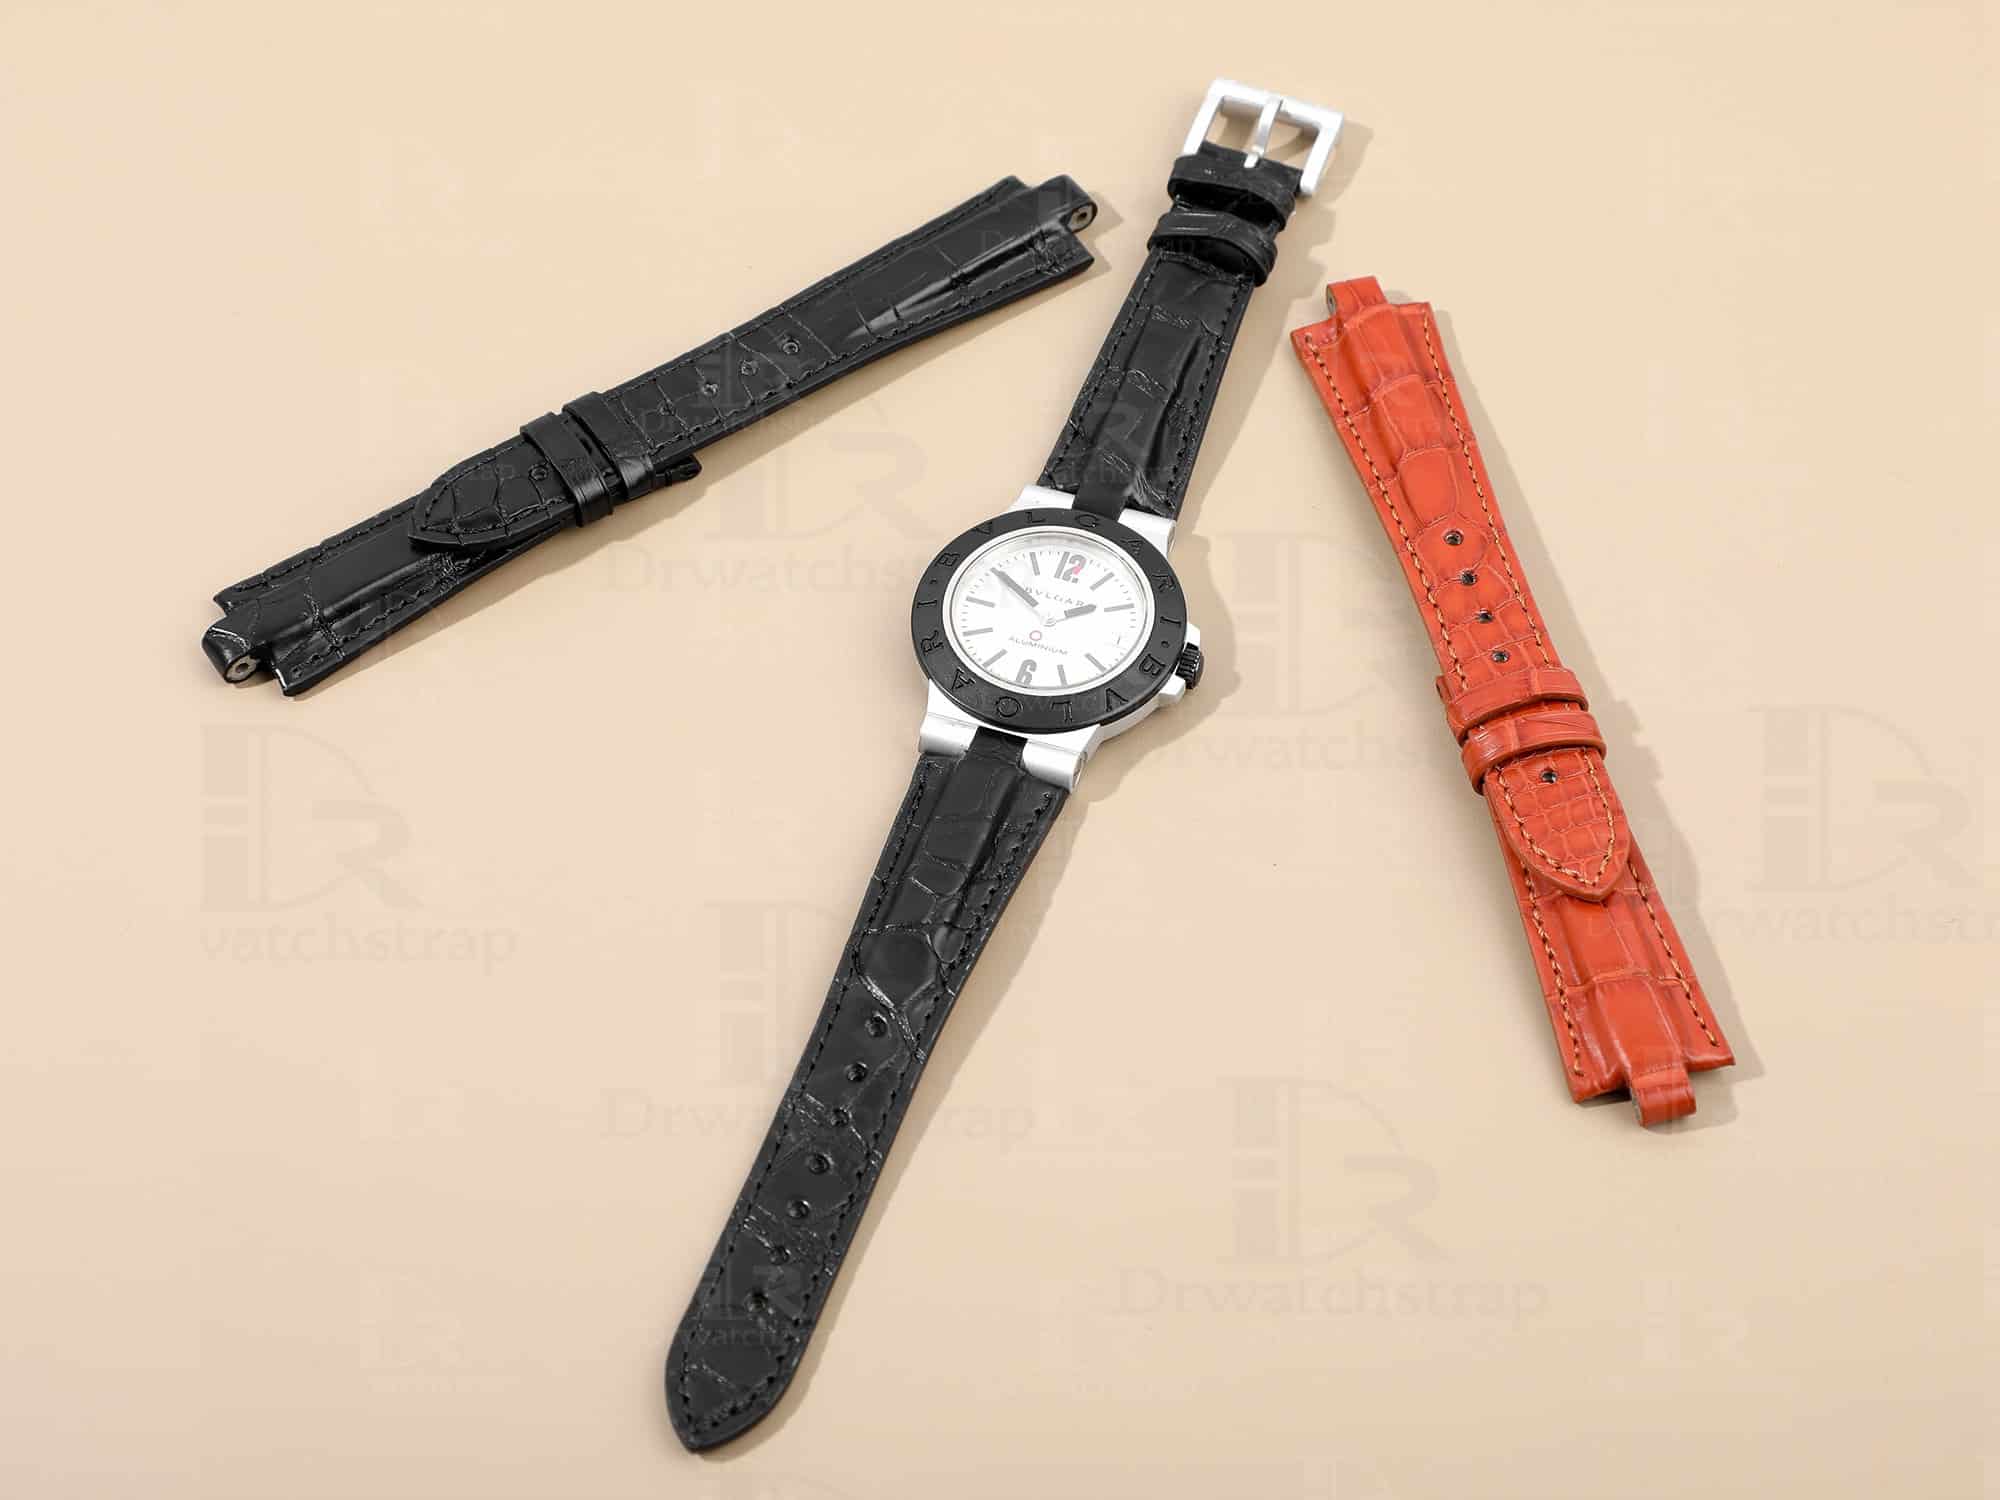 Genuine best quality Belly-scale black brown alligator crocodile custom Bvlgari leather watch strap & watch band replacement for Bvlgari Diagono Aluminium AL38A L3276 mens and women's luxury watch - OEM aftermarket high-end straps and watchbands online at a low price from dr watchstrap